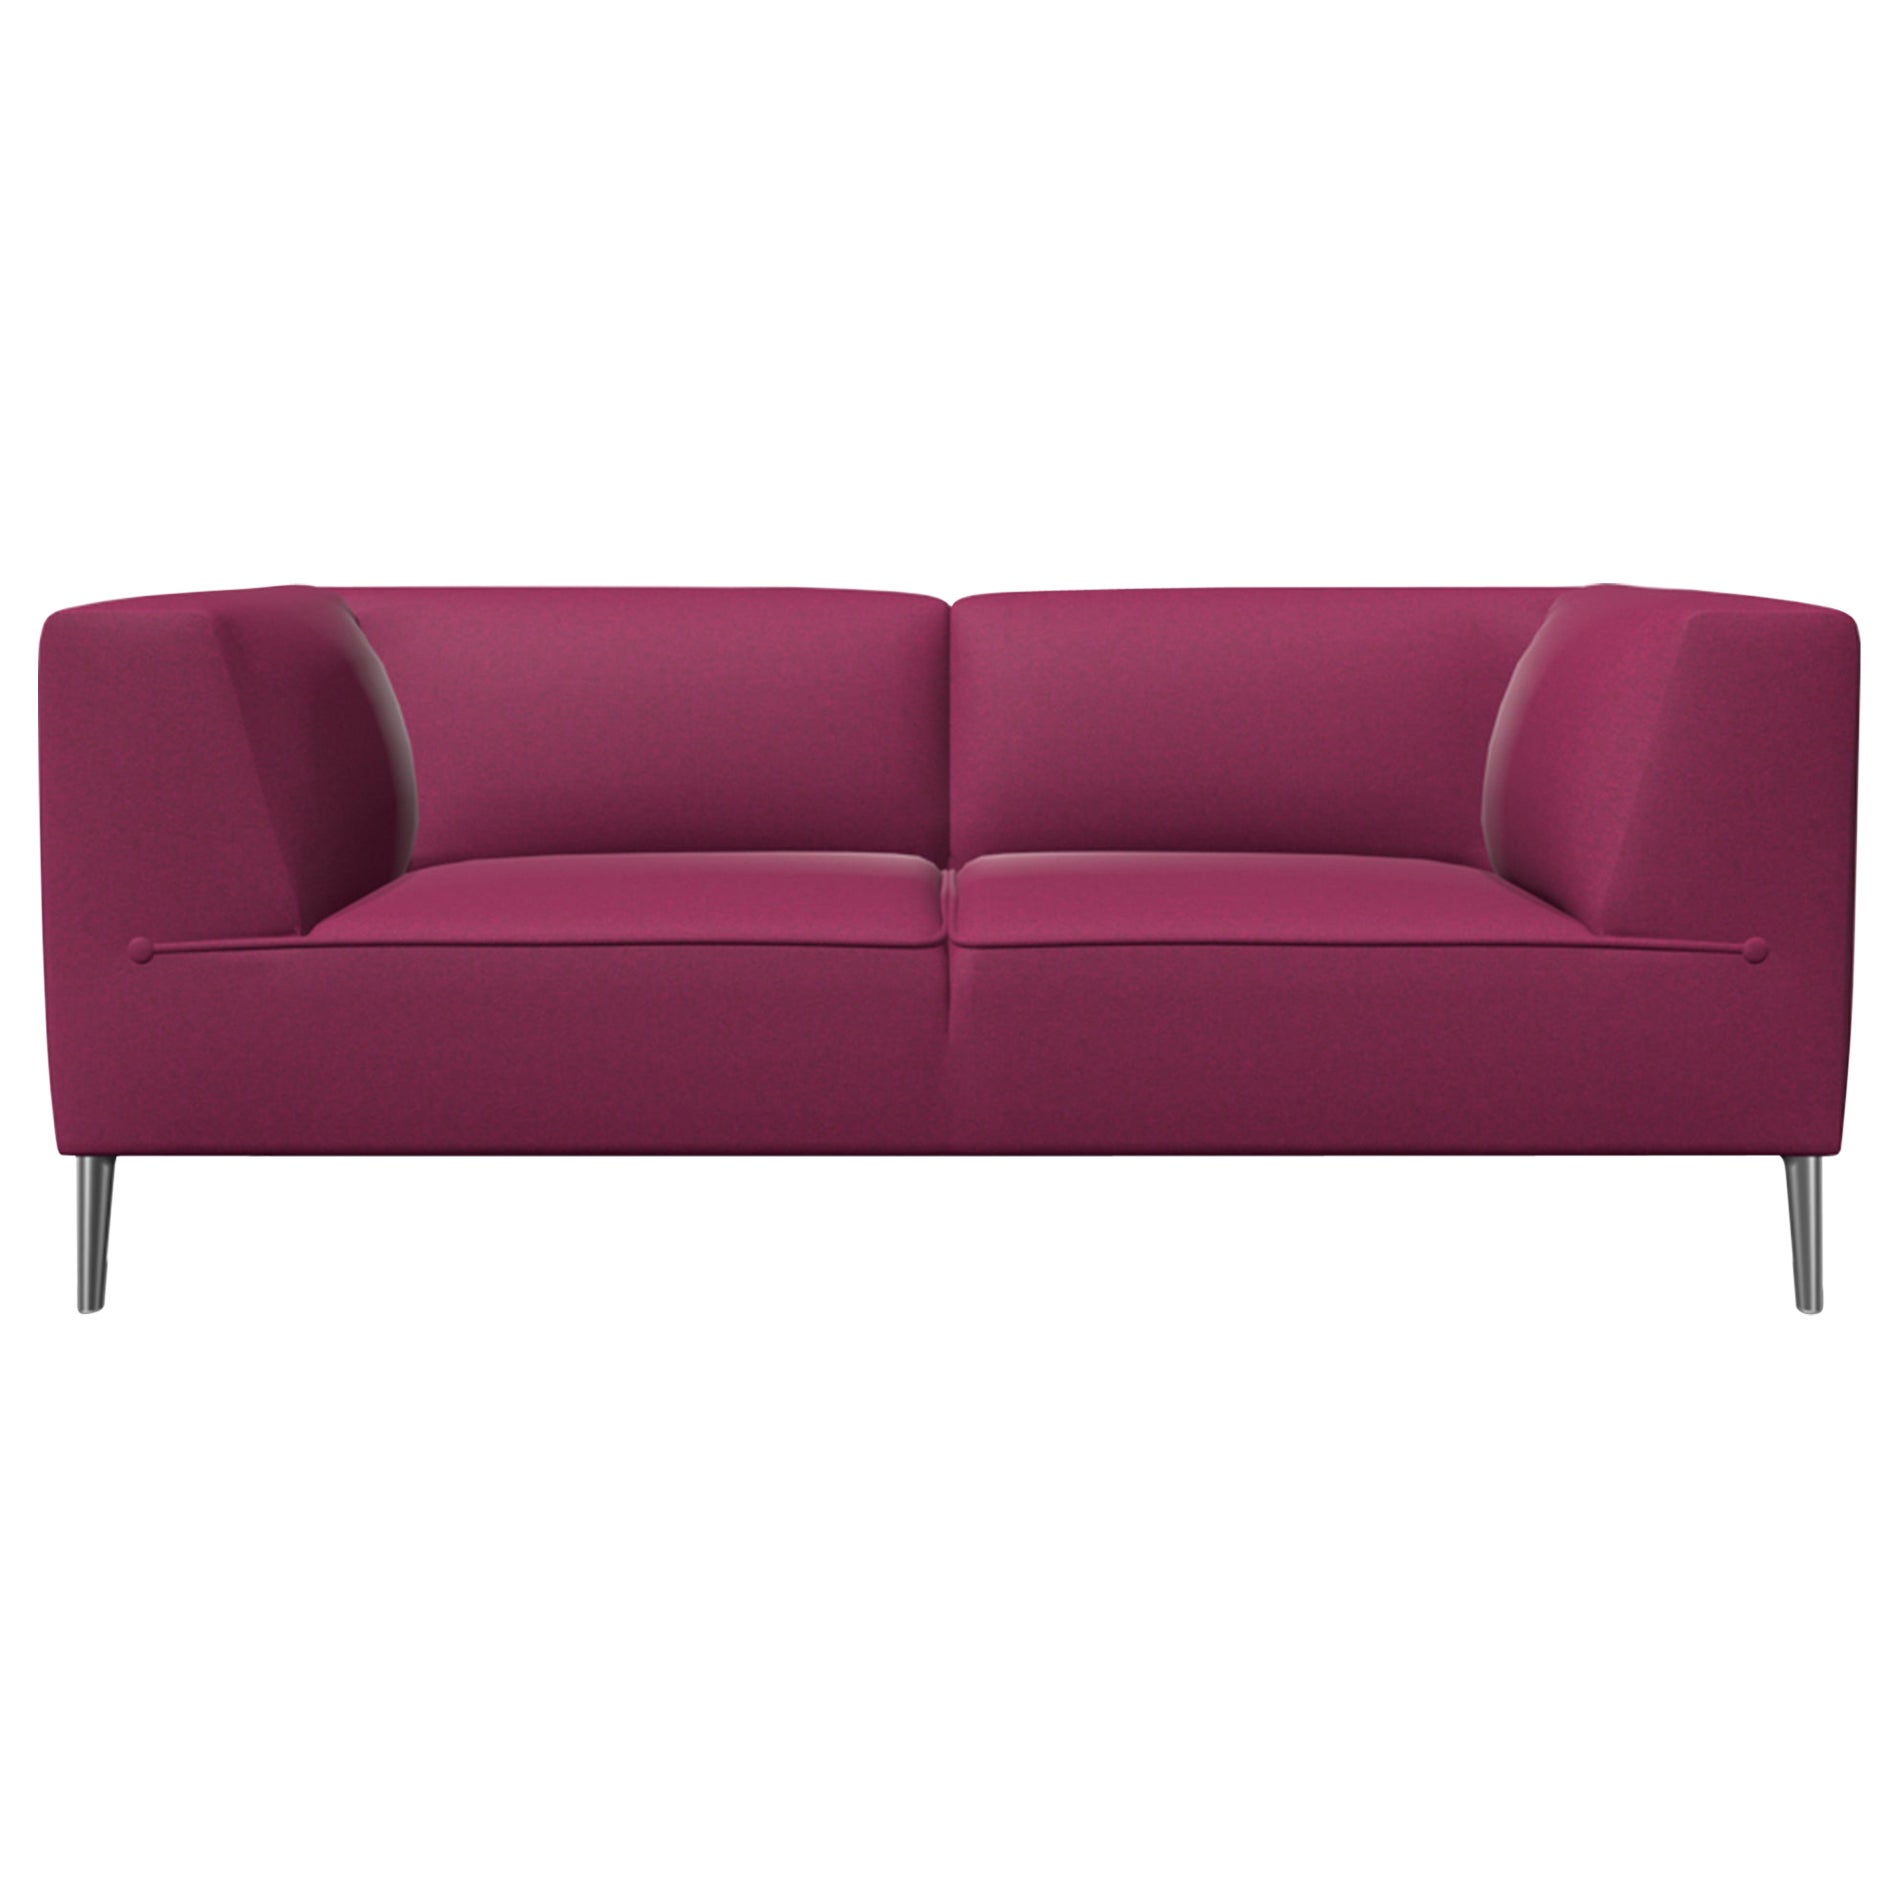 Moooi Double Seat Sofa So Good in Divina Upholstery with Polished Aluminum Feet For Sale